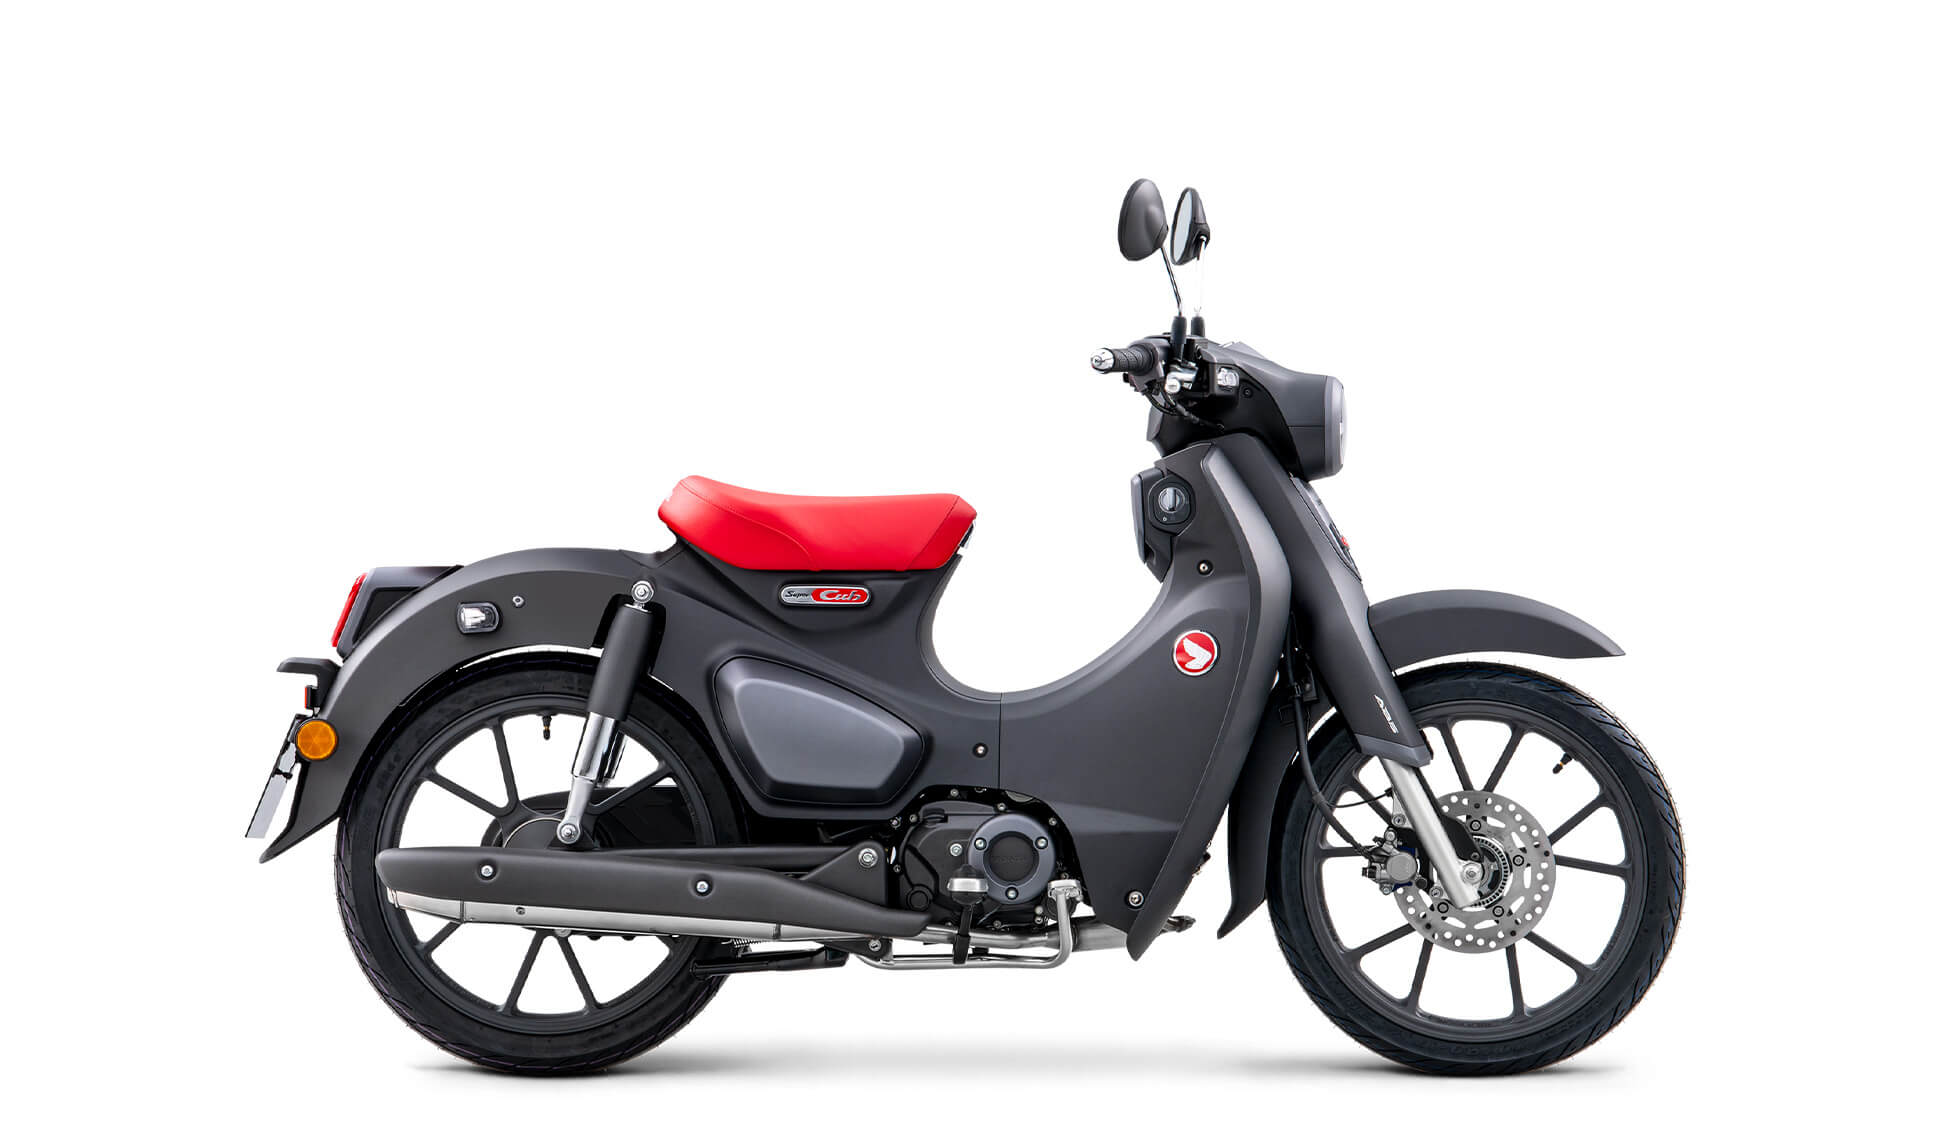 respekt Tolk temperament The Best 125cc Motorcycles & Scooters [2023 Edition]